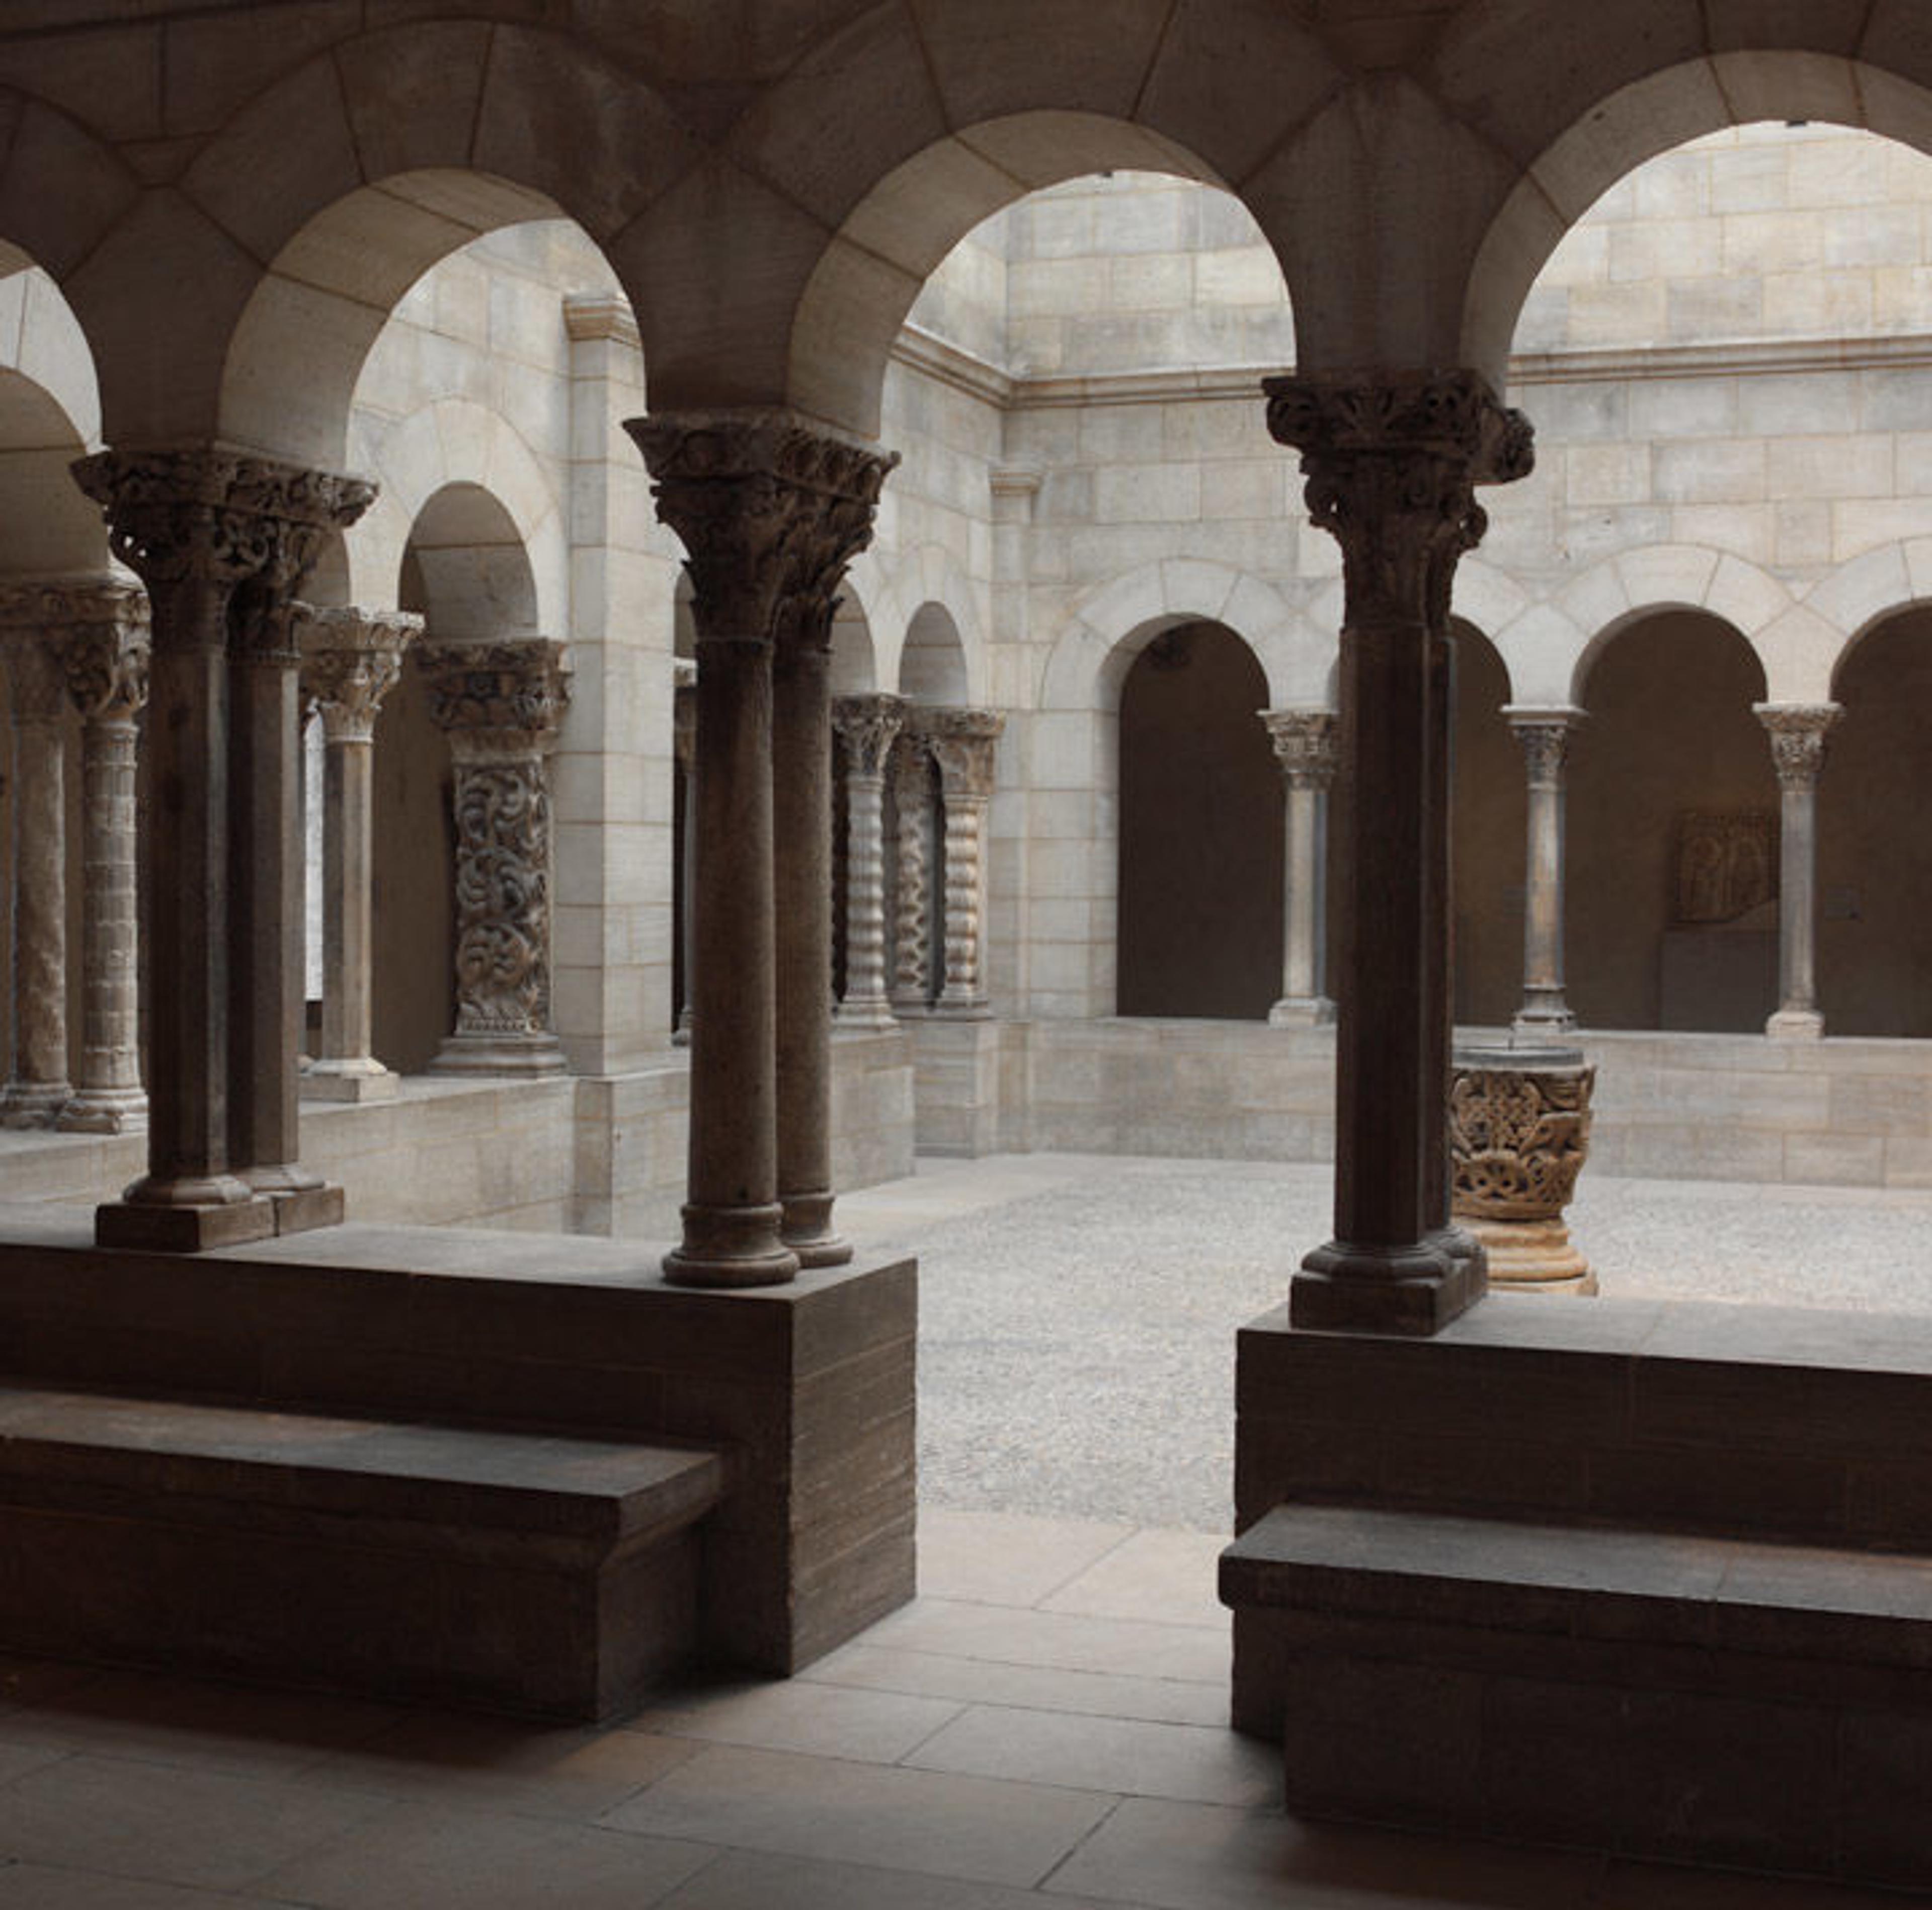 View of the medieval Saint-Guilhem Cloister at The Met Cloisters